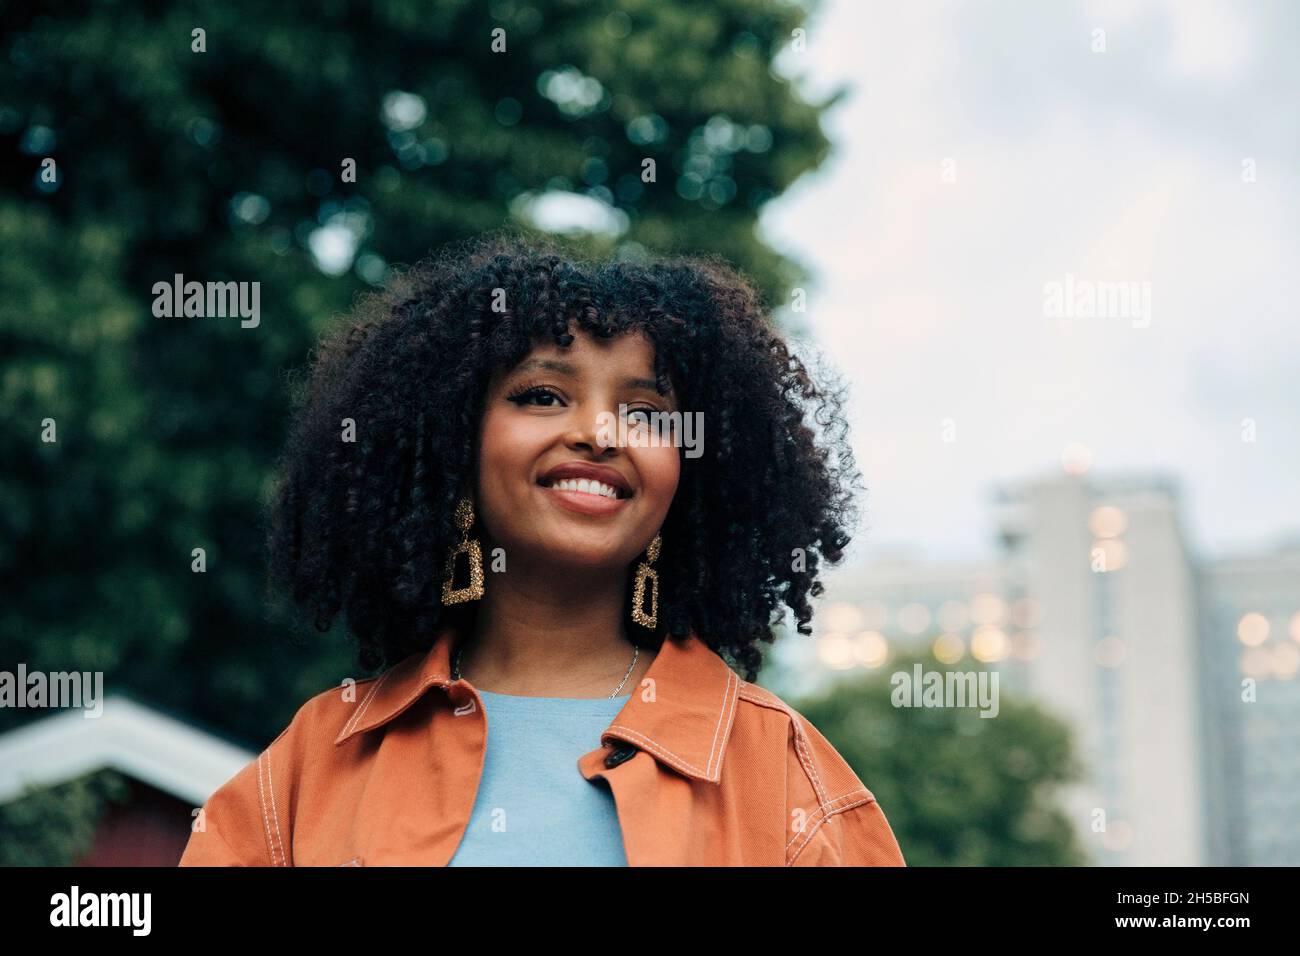 Smiling teenage girl with black Afro hairstyle Stock Photo